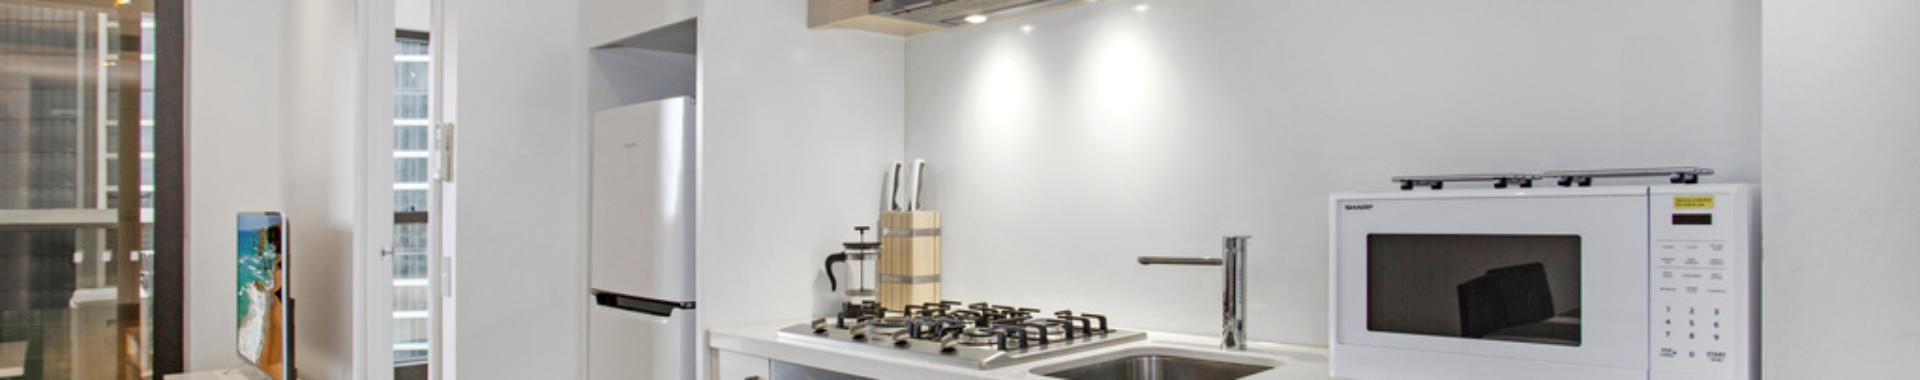 Southbank Power 2 bed corporate apartment kitchen